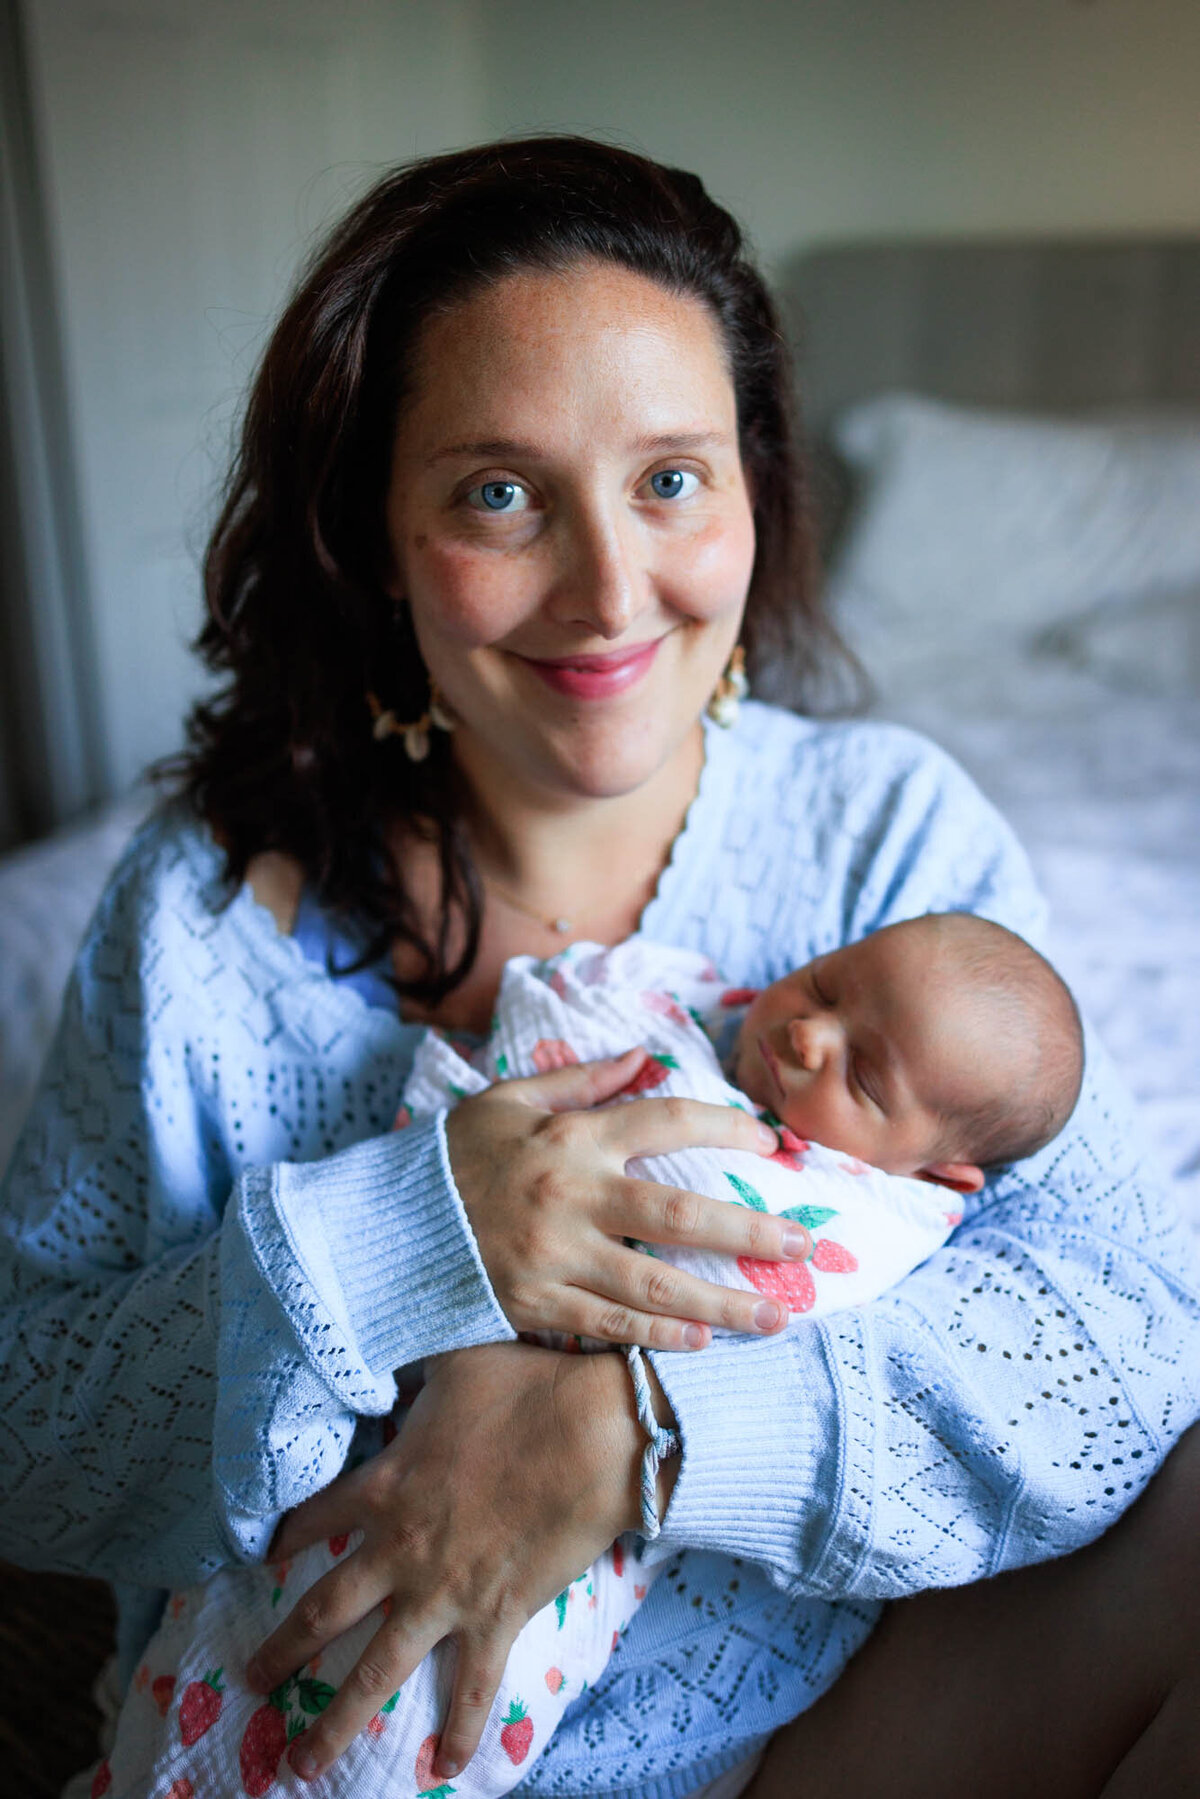 A new mom holds her newborn baby while looking at the camera and smiling.